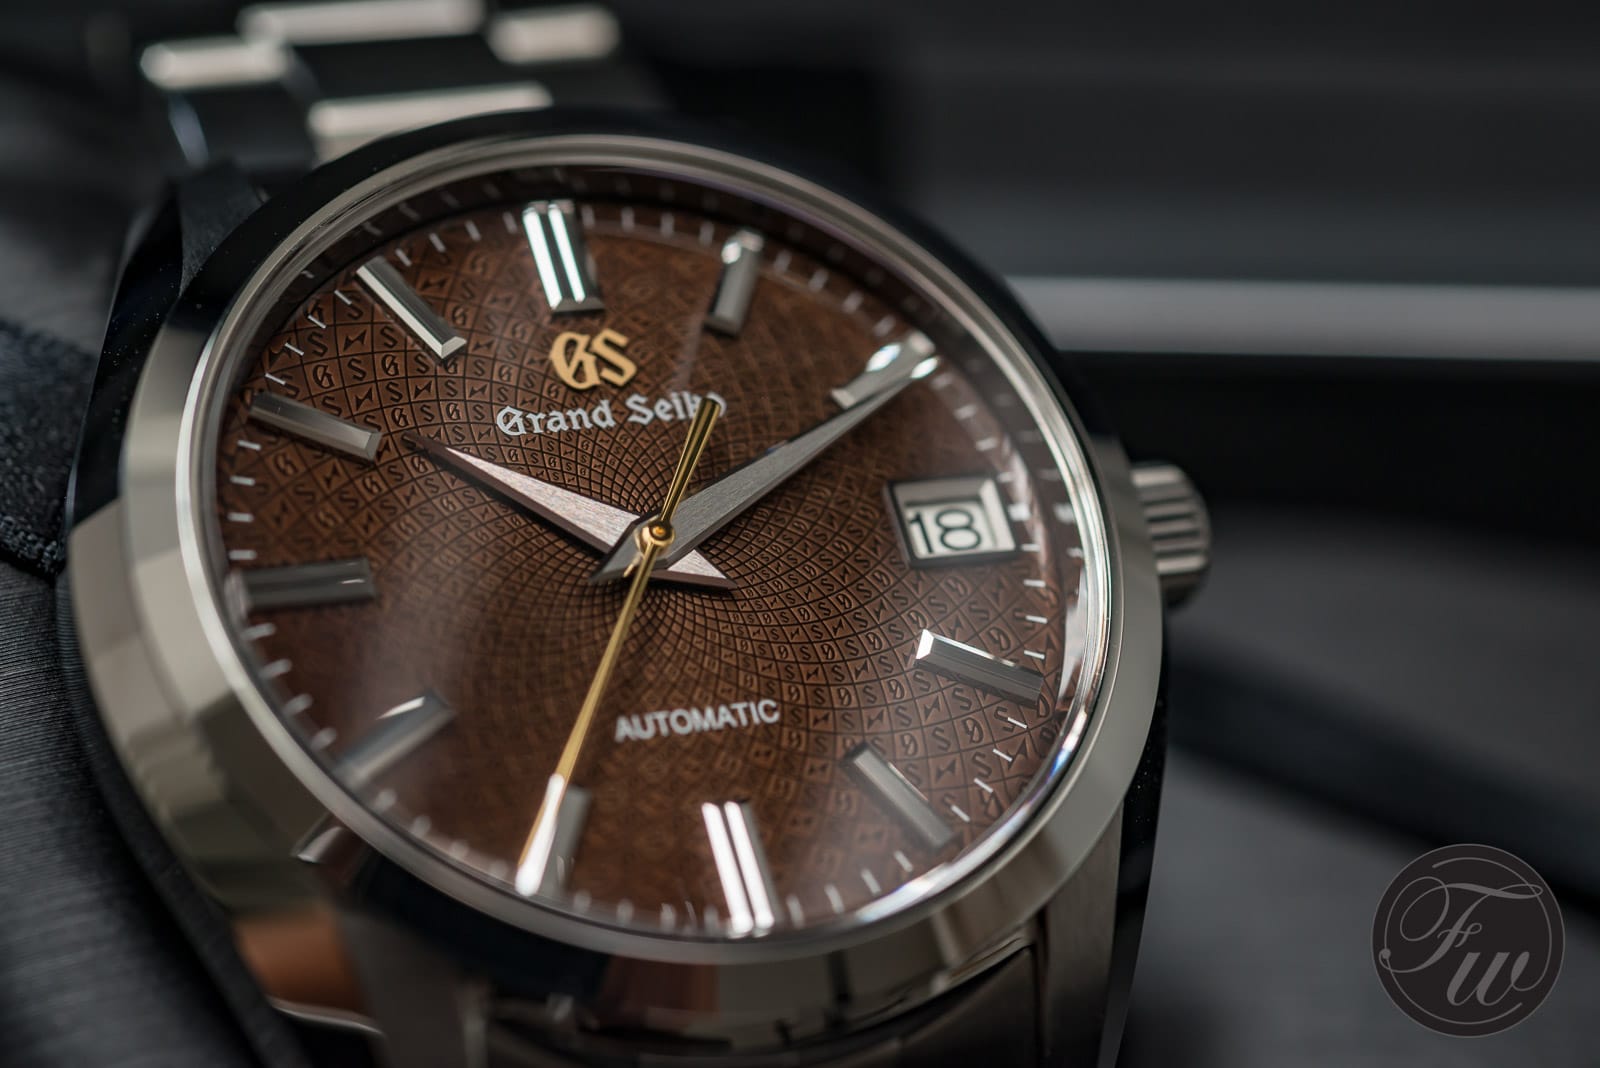 Grand Seiko SBGR311 Review - Limited Edition of 1300 pieces only